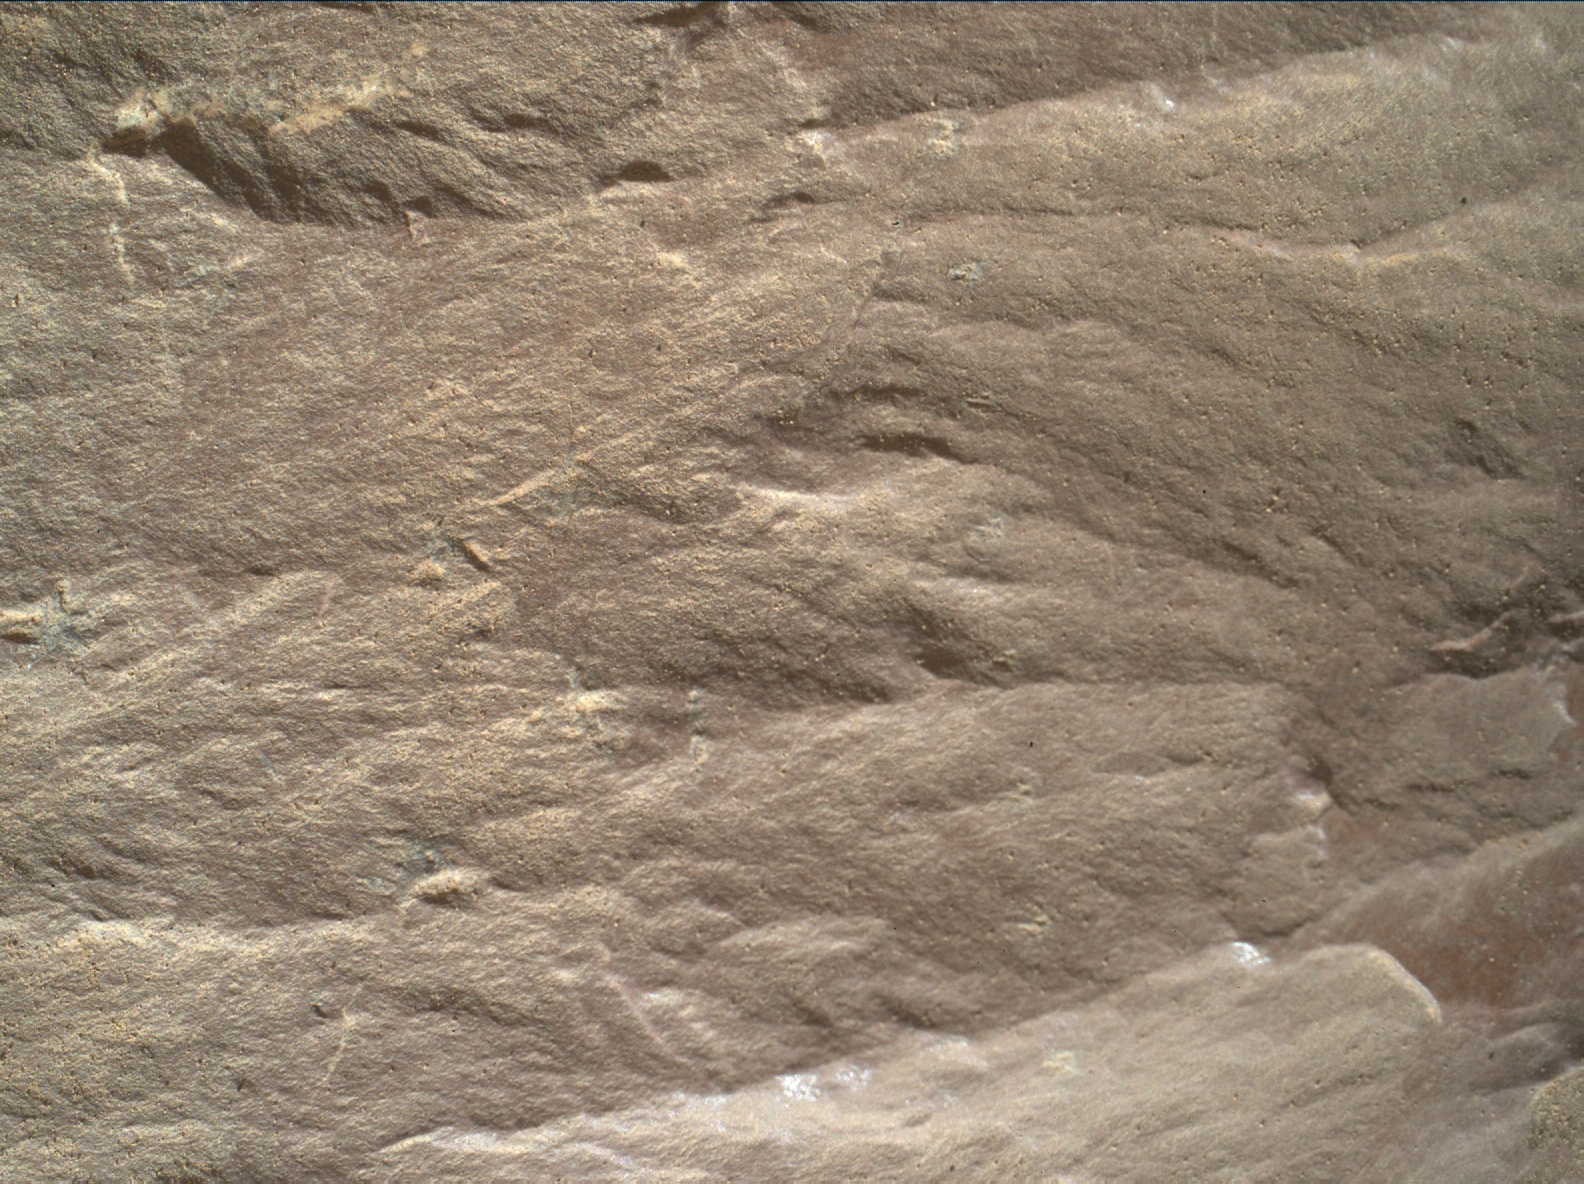 Nasa's Mars rover Curiosity acquired this image using its Mars Hand Lens Imager (MAHLI) on Sol 1886